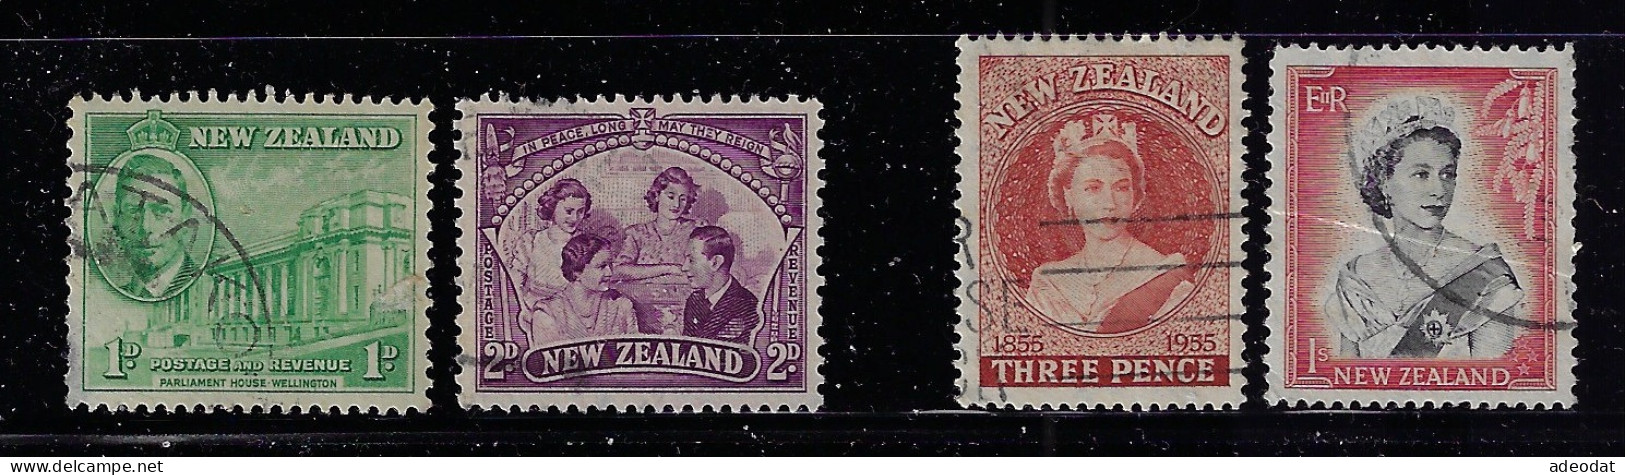 NEW ZEALAND 1946,1955 PARLIAMENT HOUSE,ROYAL FAMILY,THE QUEEN  SCOTT #248,250,297,303 USED - Used Stamps